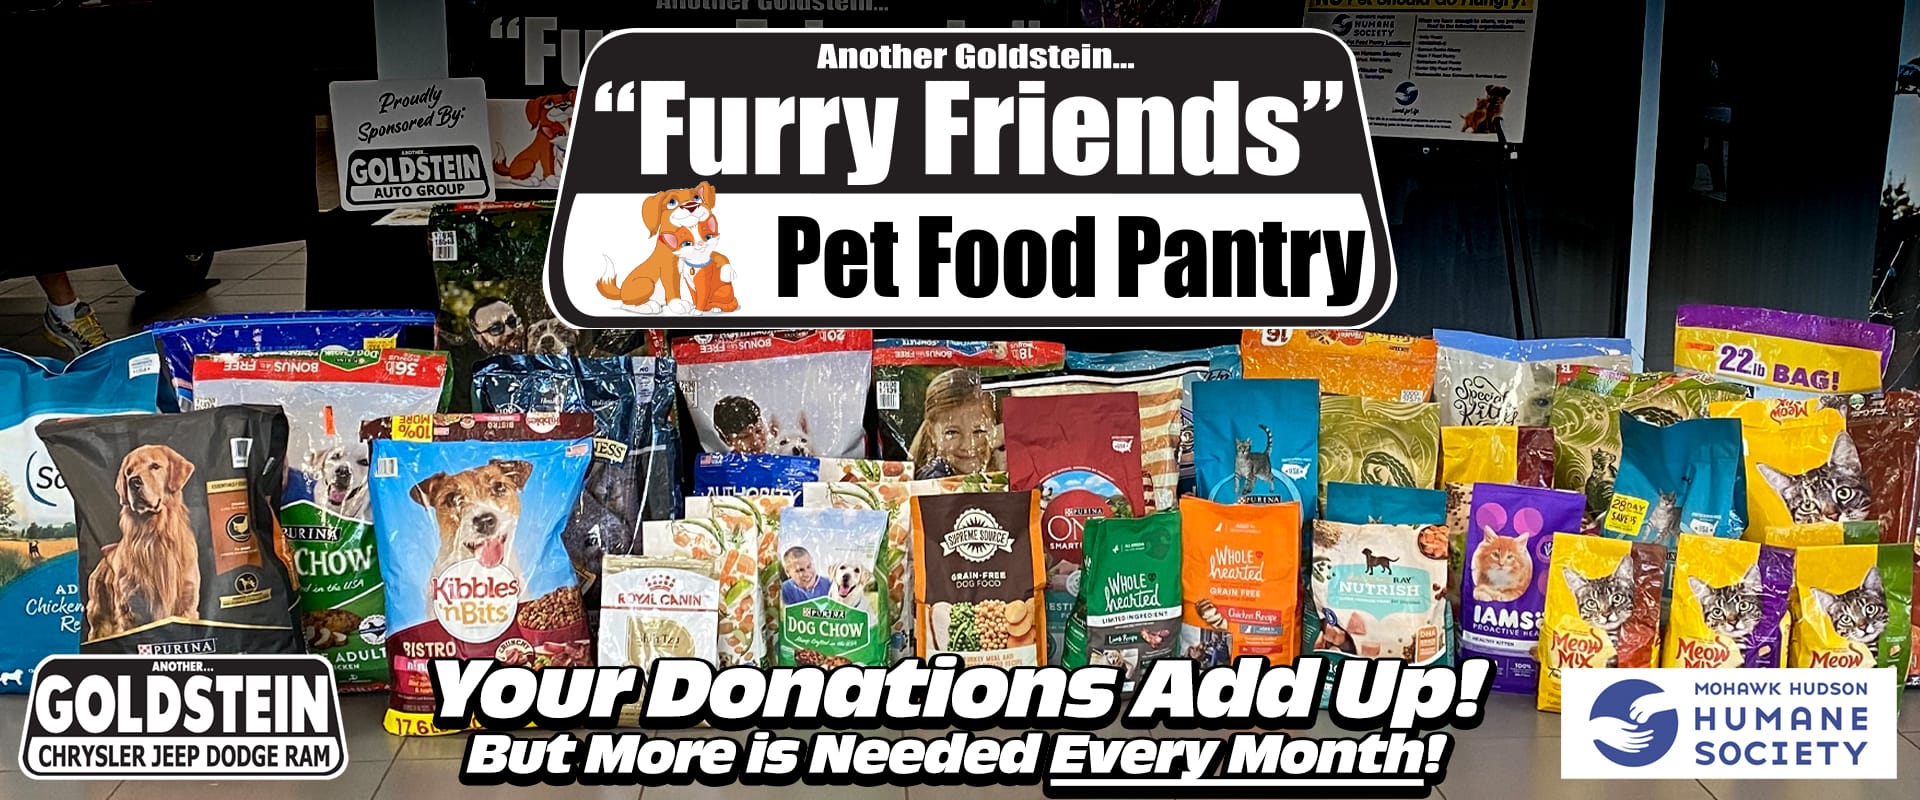 Goldstein Chrysler Dodge Jeep RAM and Mohawk Hudson Humane Society dry pet food donations